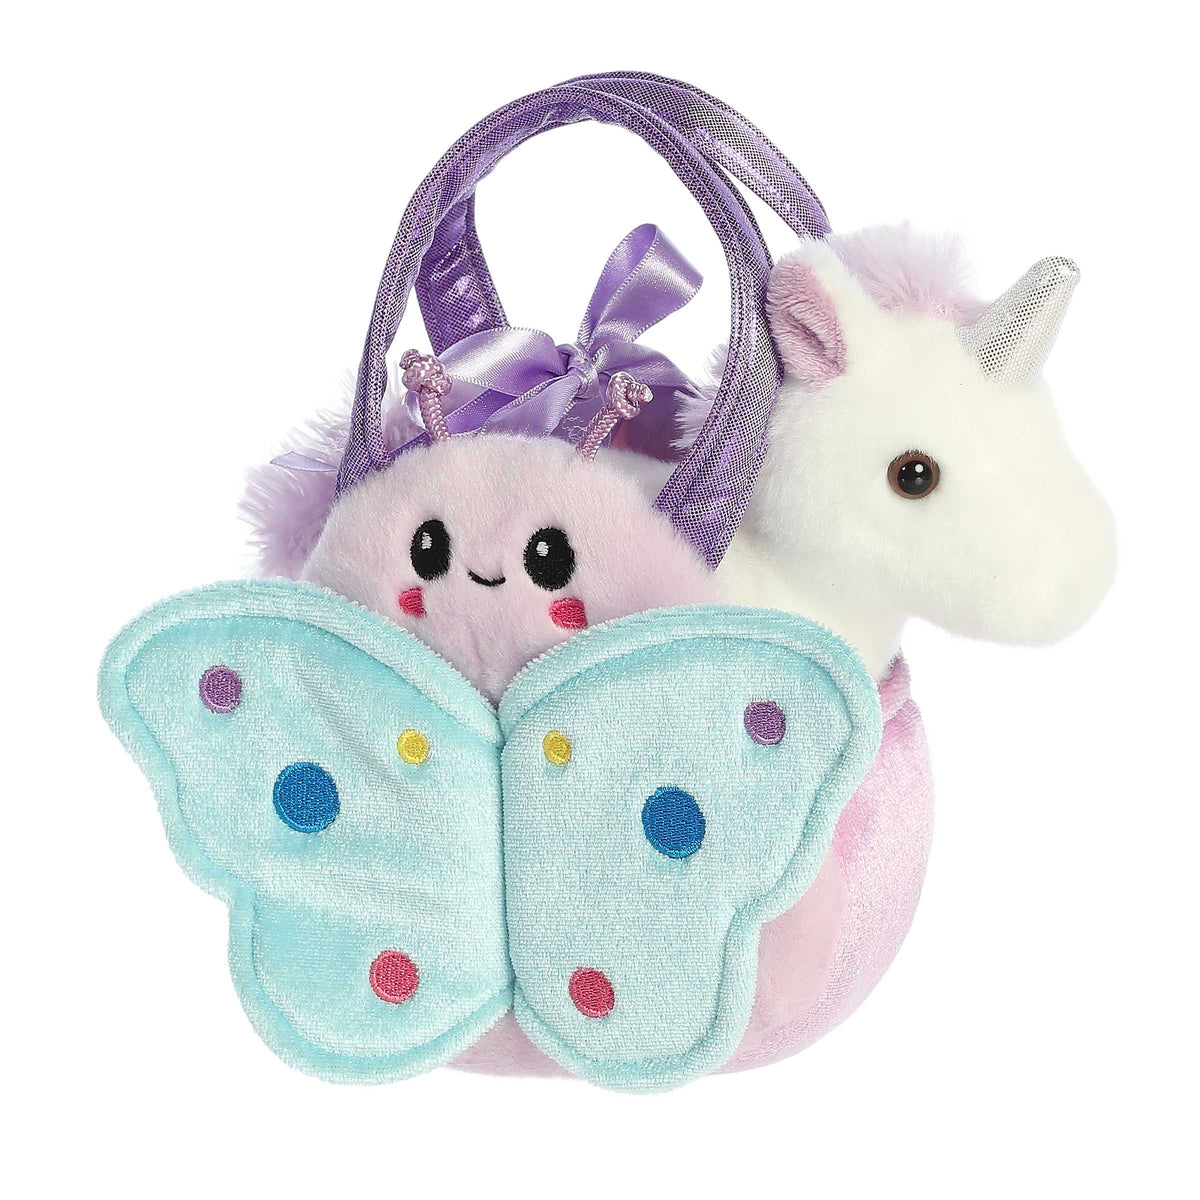 White and purple unicorn plush in a vibrant blue butterfly carrier, perfect for play and as a delightful gift.